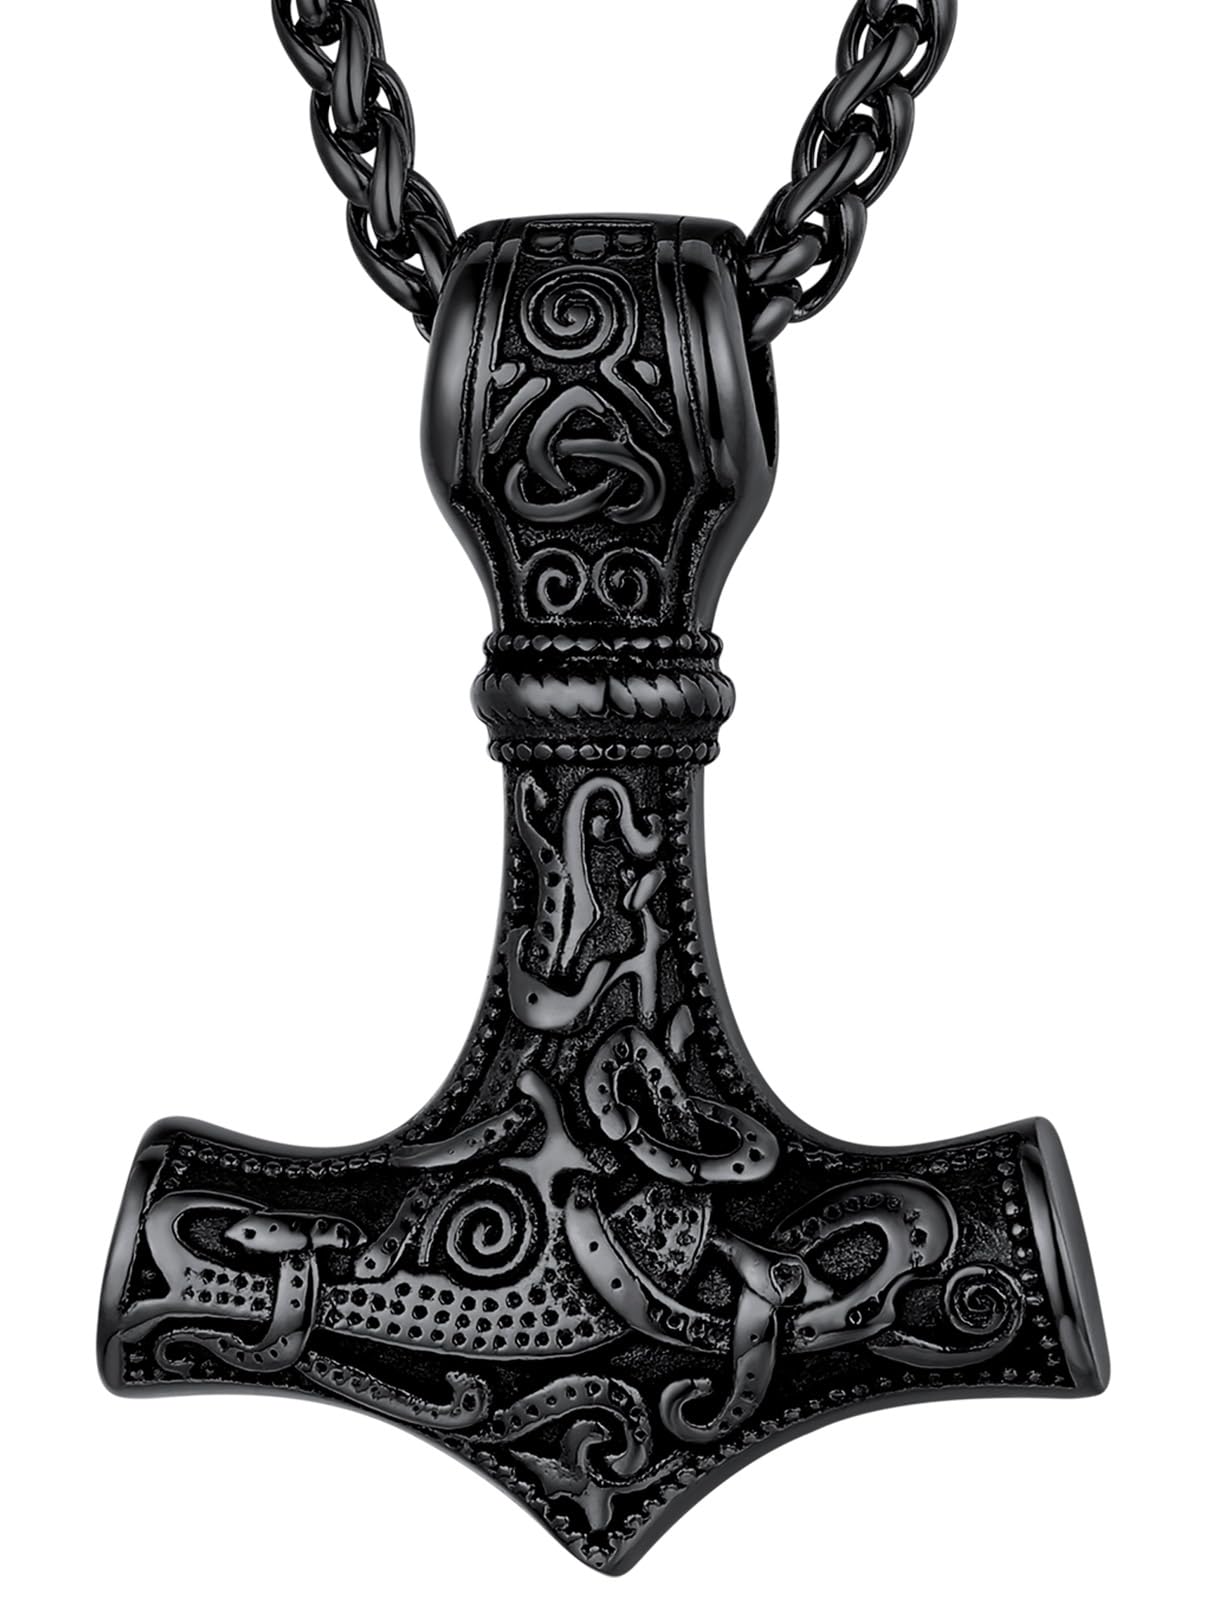 FaithHeart Viking Thor's Hammer Talisman Necklace for Men, Vintage Norse Mjolnir Amulet Pendant, Stainless Steel Jewelry